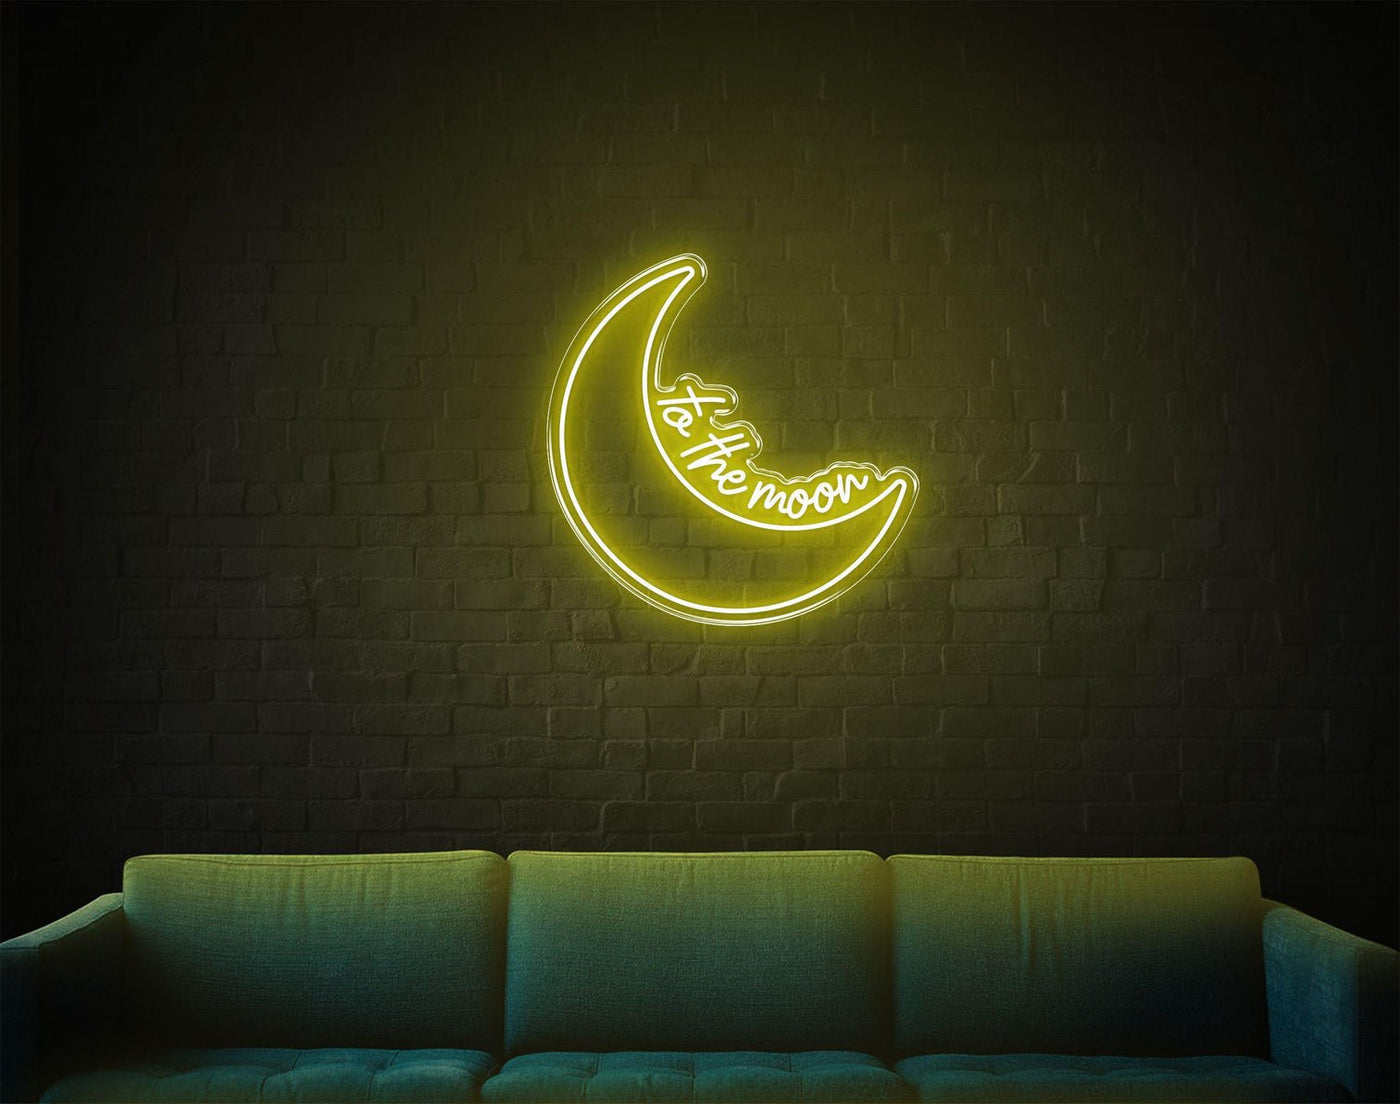 To The Moon LED neon sign - 30inch x 30inchYellow